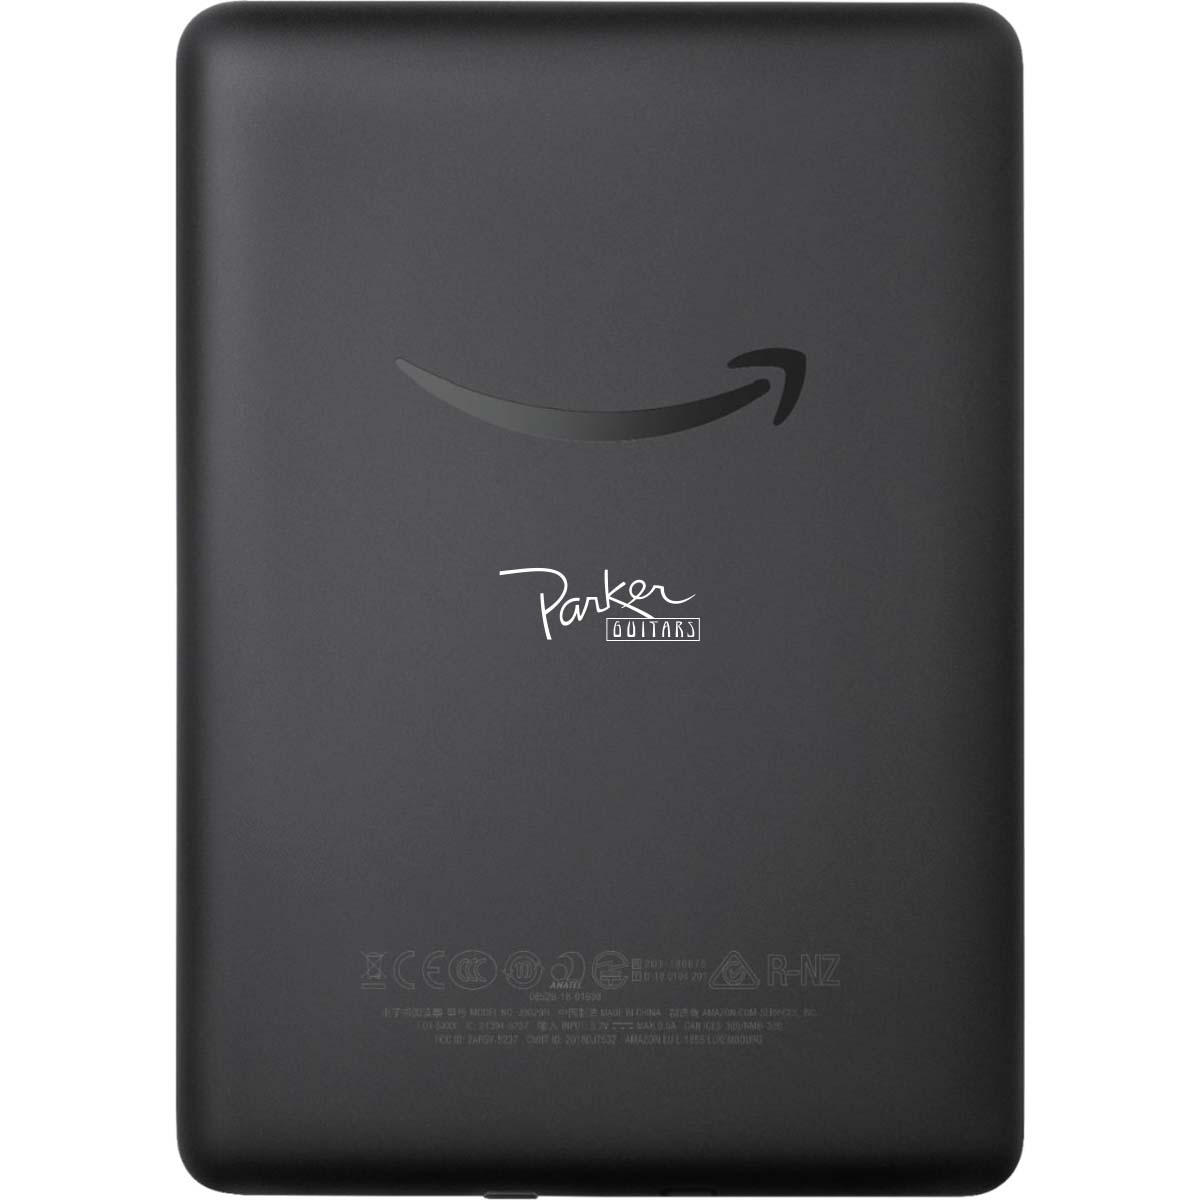 
                  
                    Amazon Kindle 8GB with Special Offers - Black
                  
                